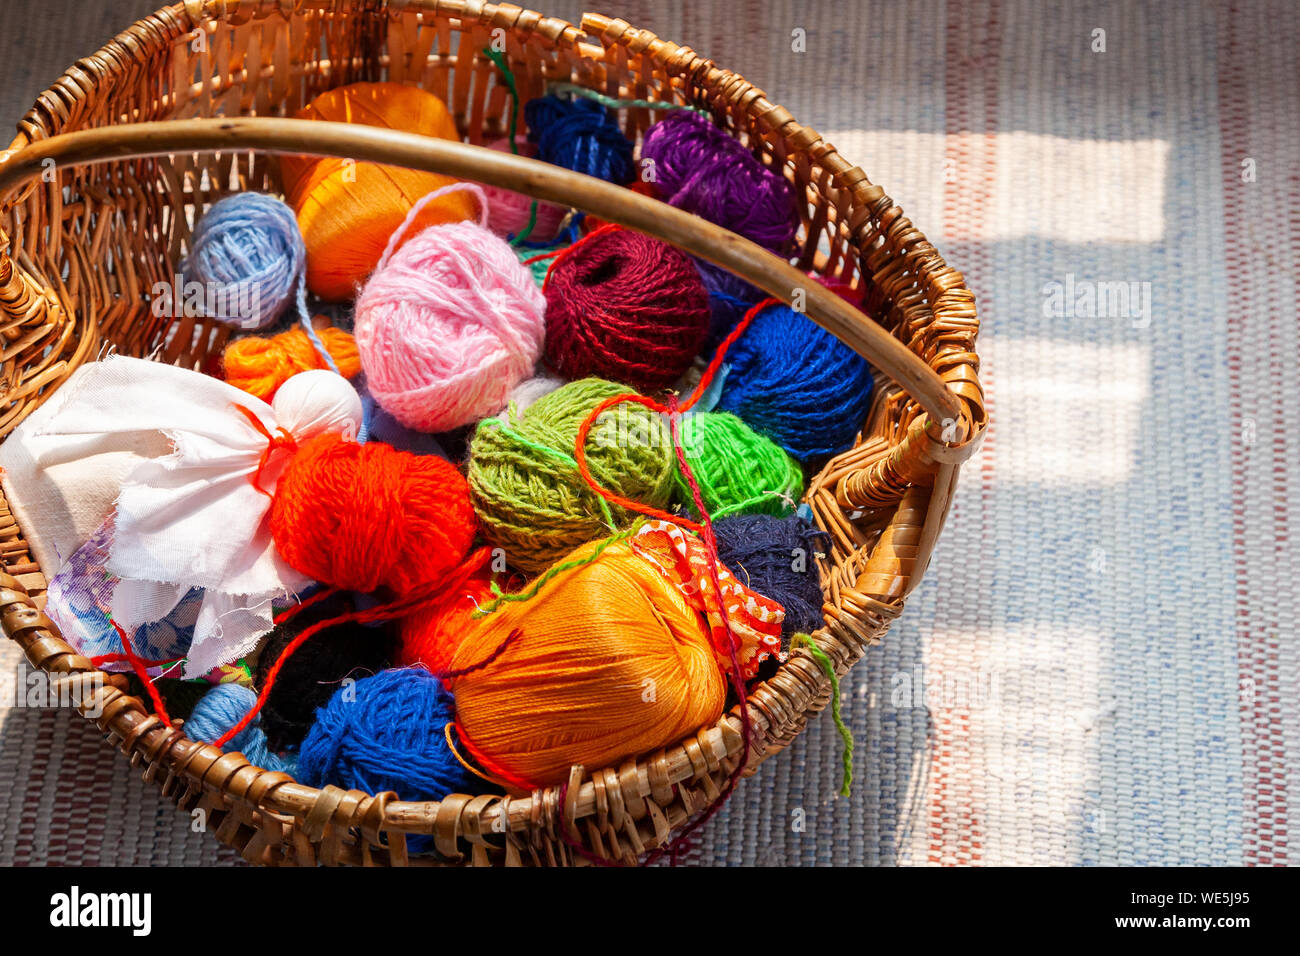 Multicolored yarn balls in a straw basket on a wooden table Stock